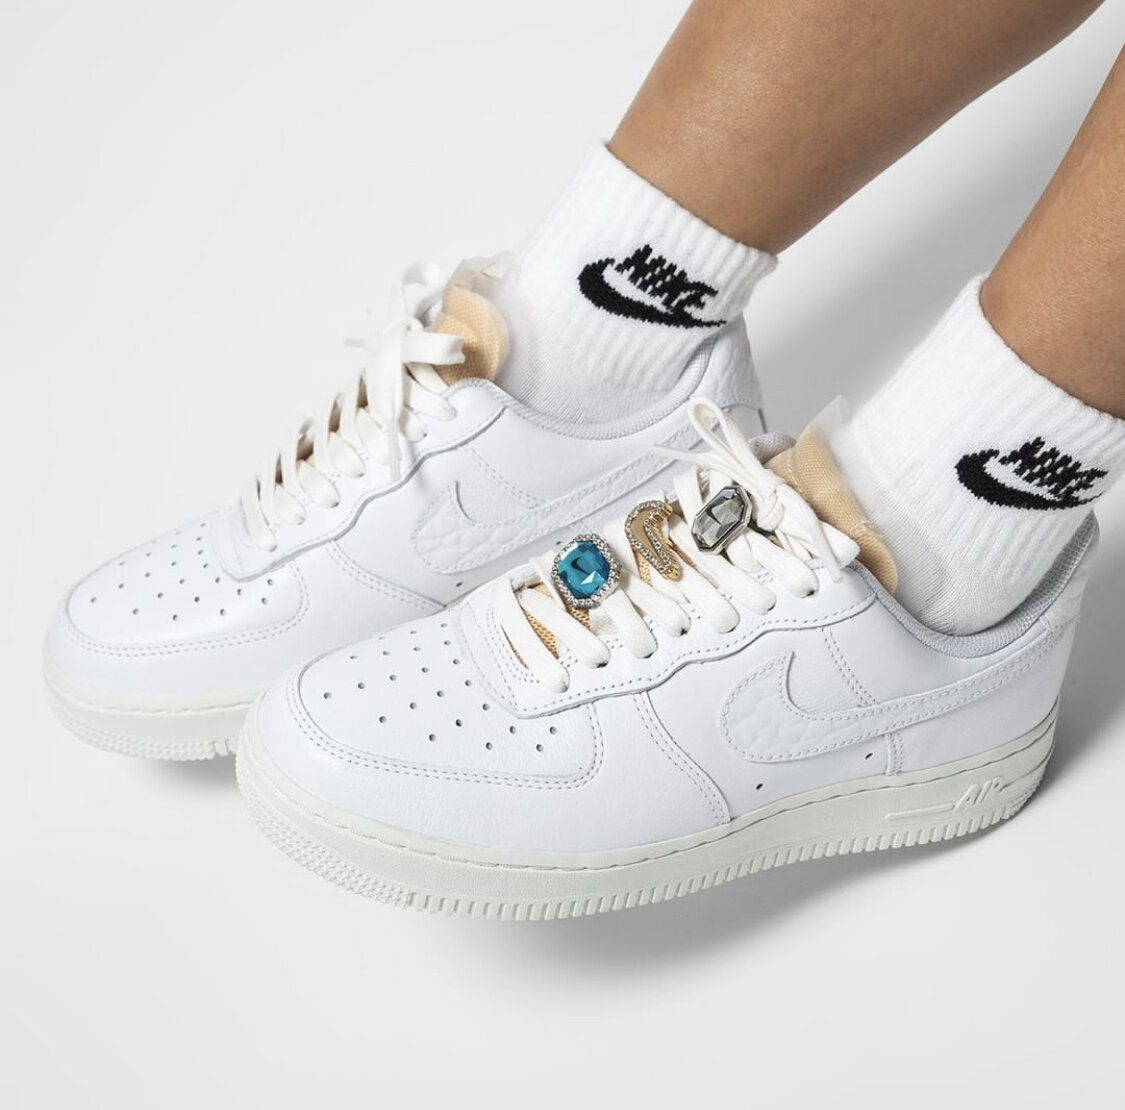 Cop or Can: The Latest Air Force 1 